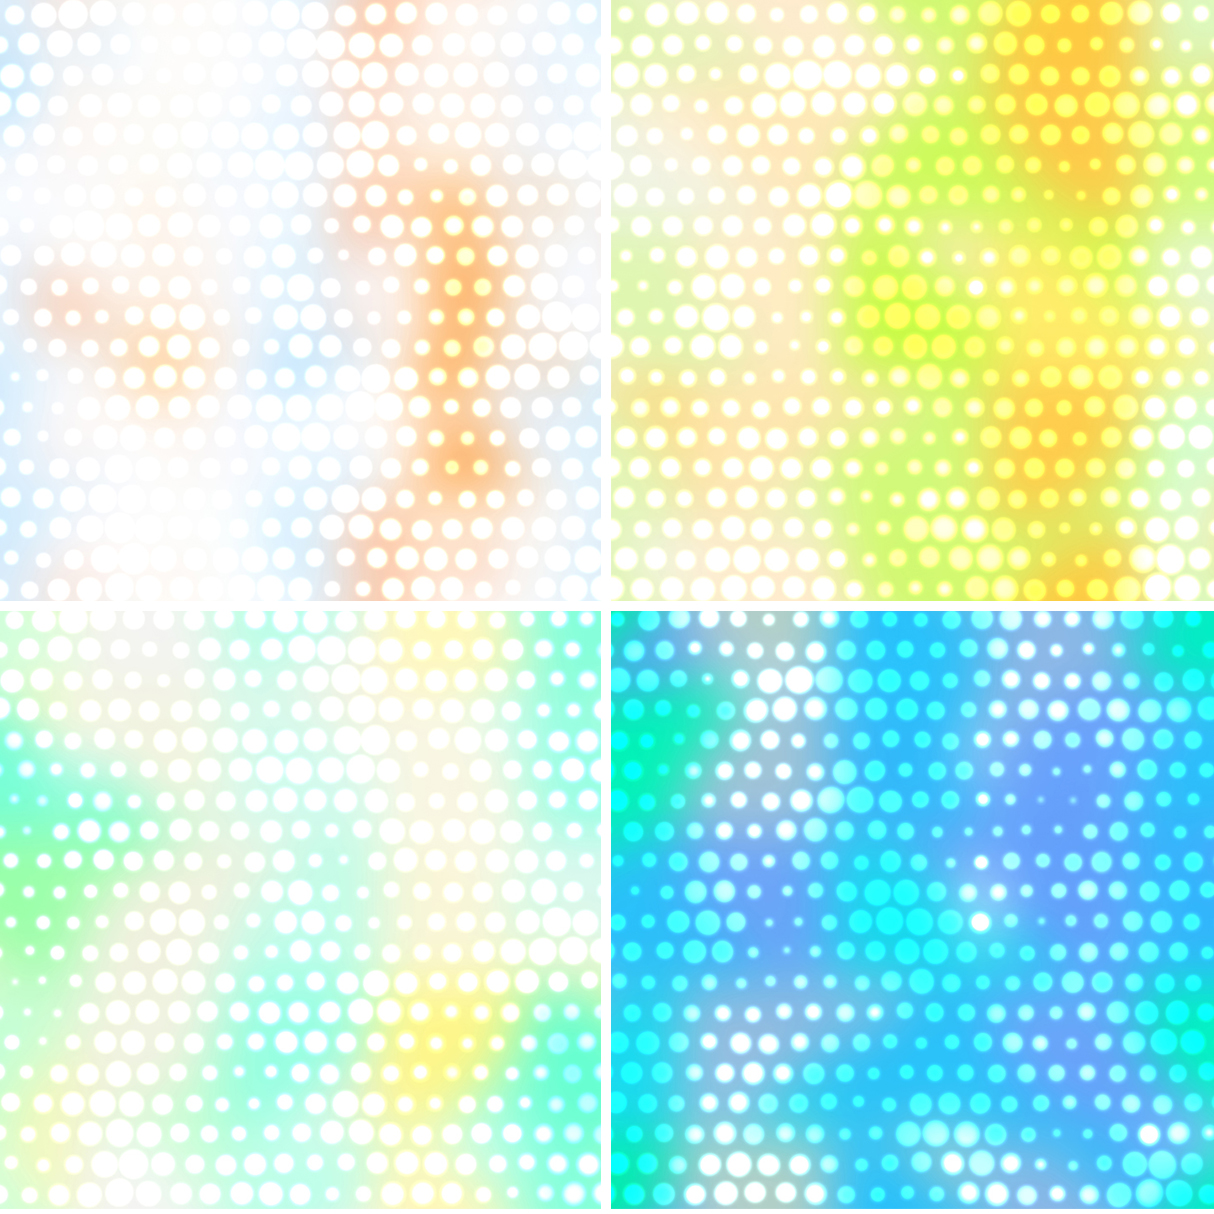 50 Shining Dotty Backgrounds Samples Preview – Part 2